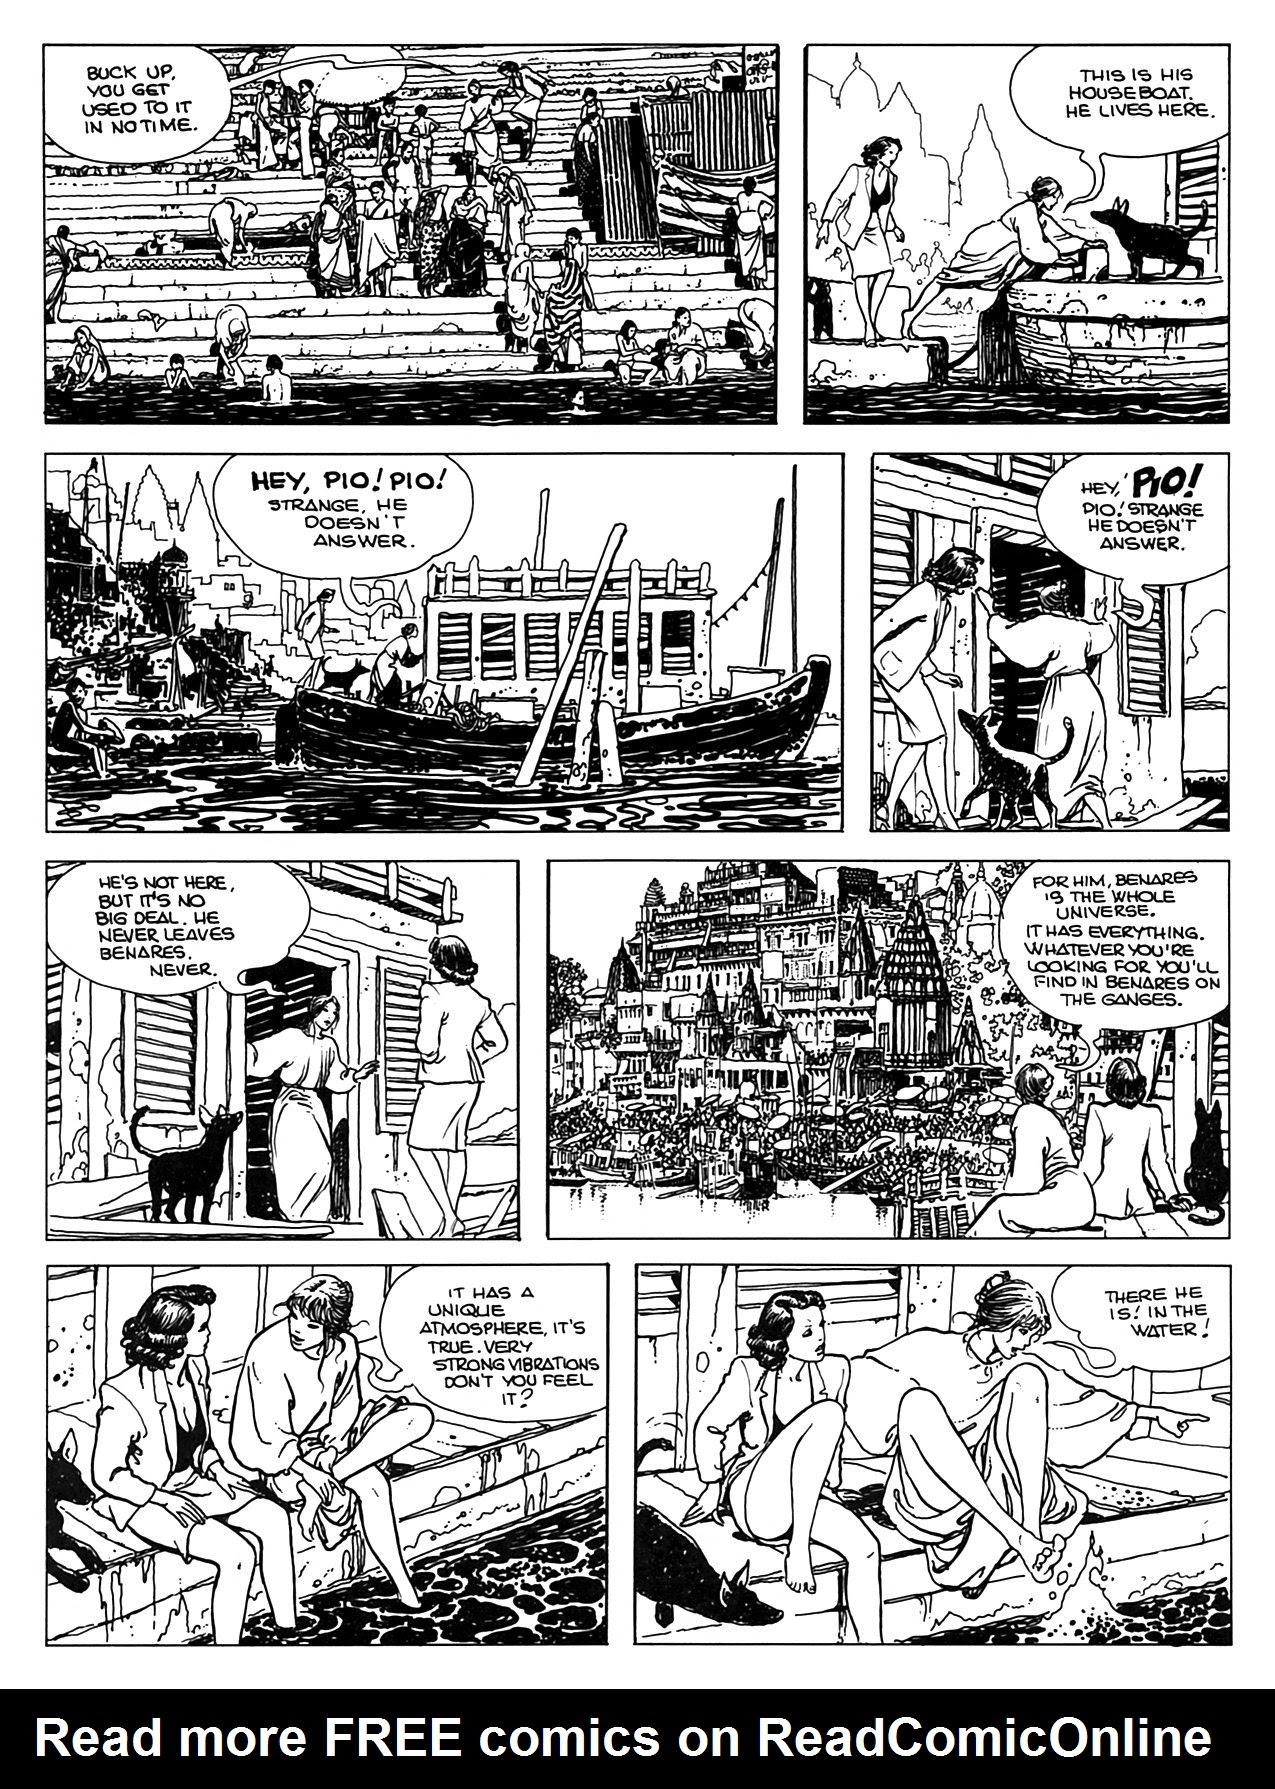 Read online Perchance to dream - The Indian adventures of Giuseppe Bergman comic -  Issue # TPB - 98